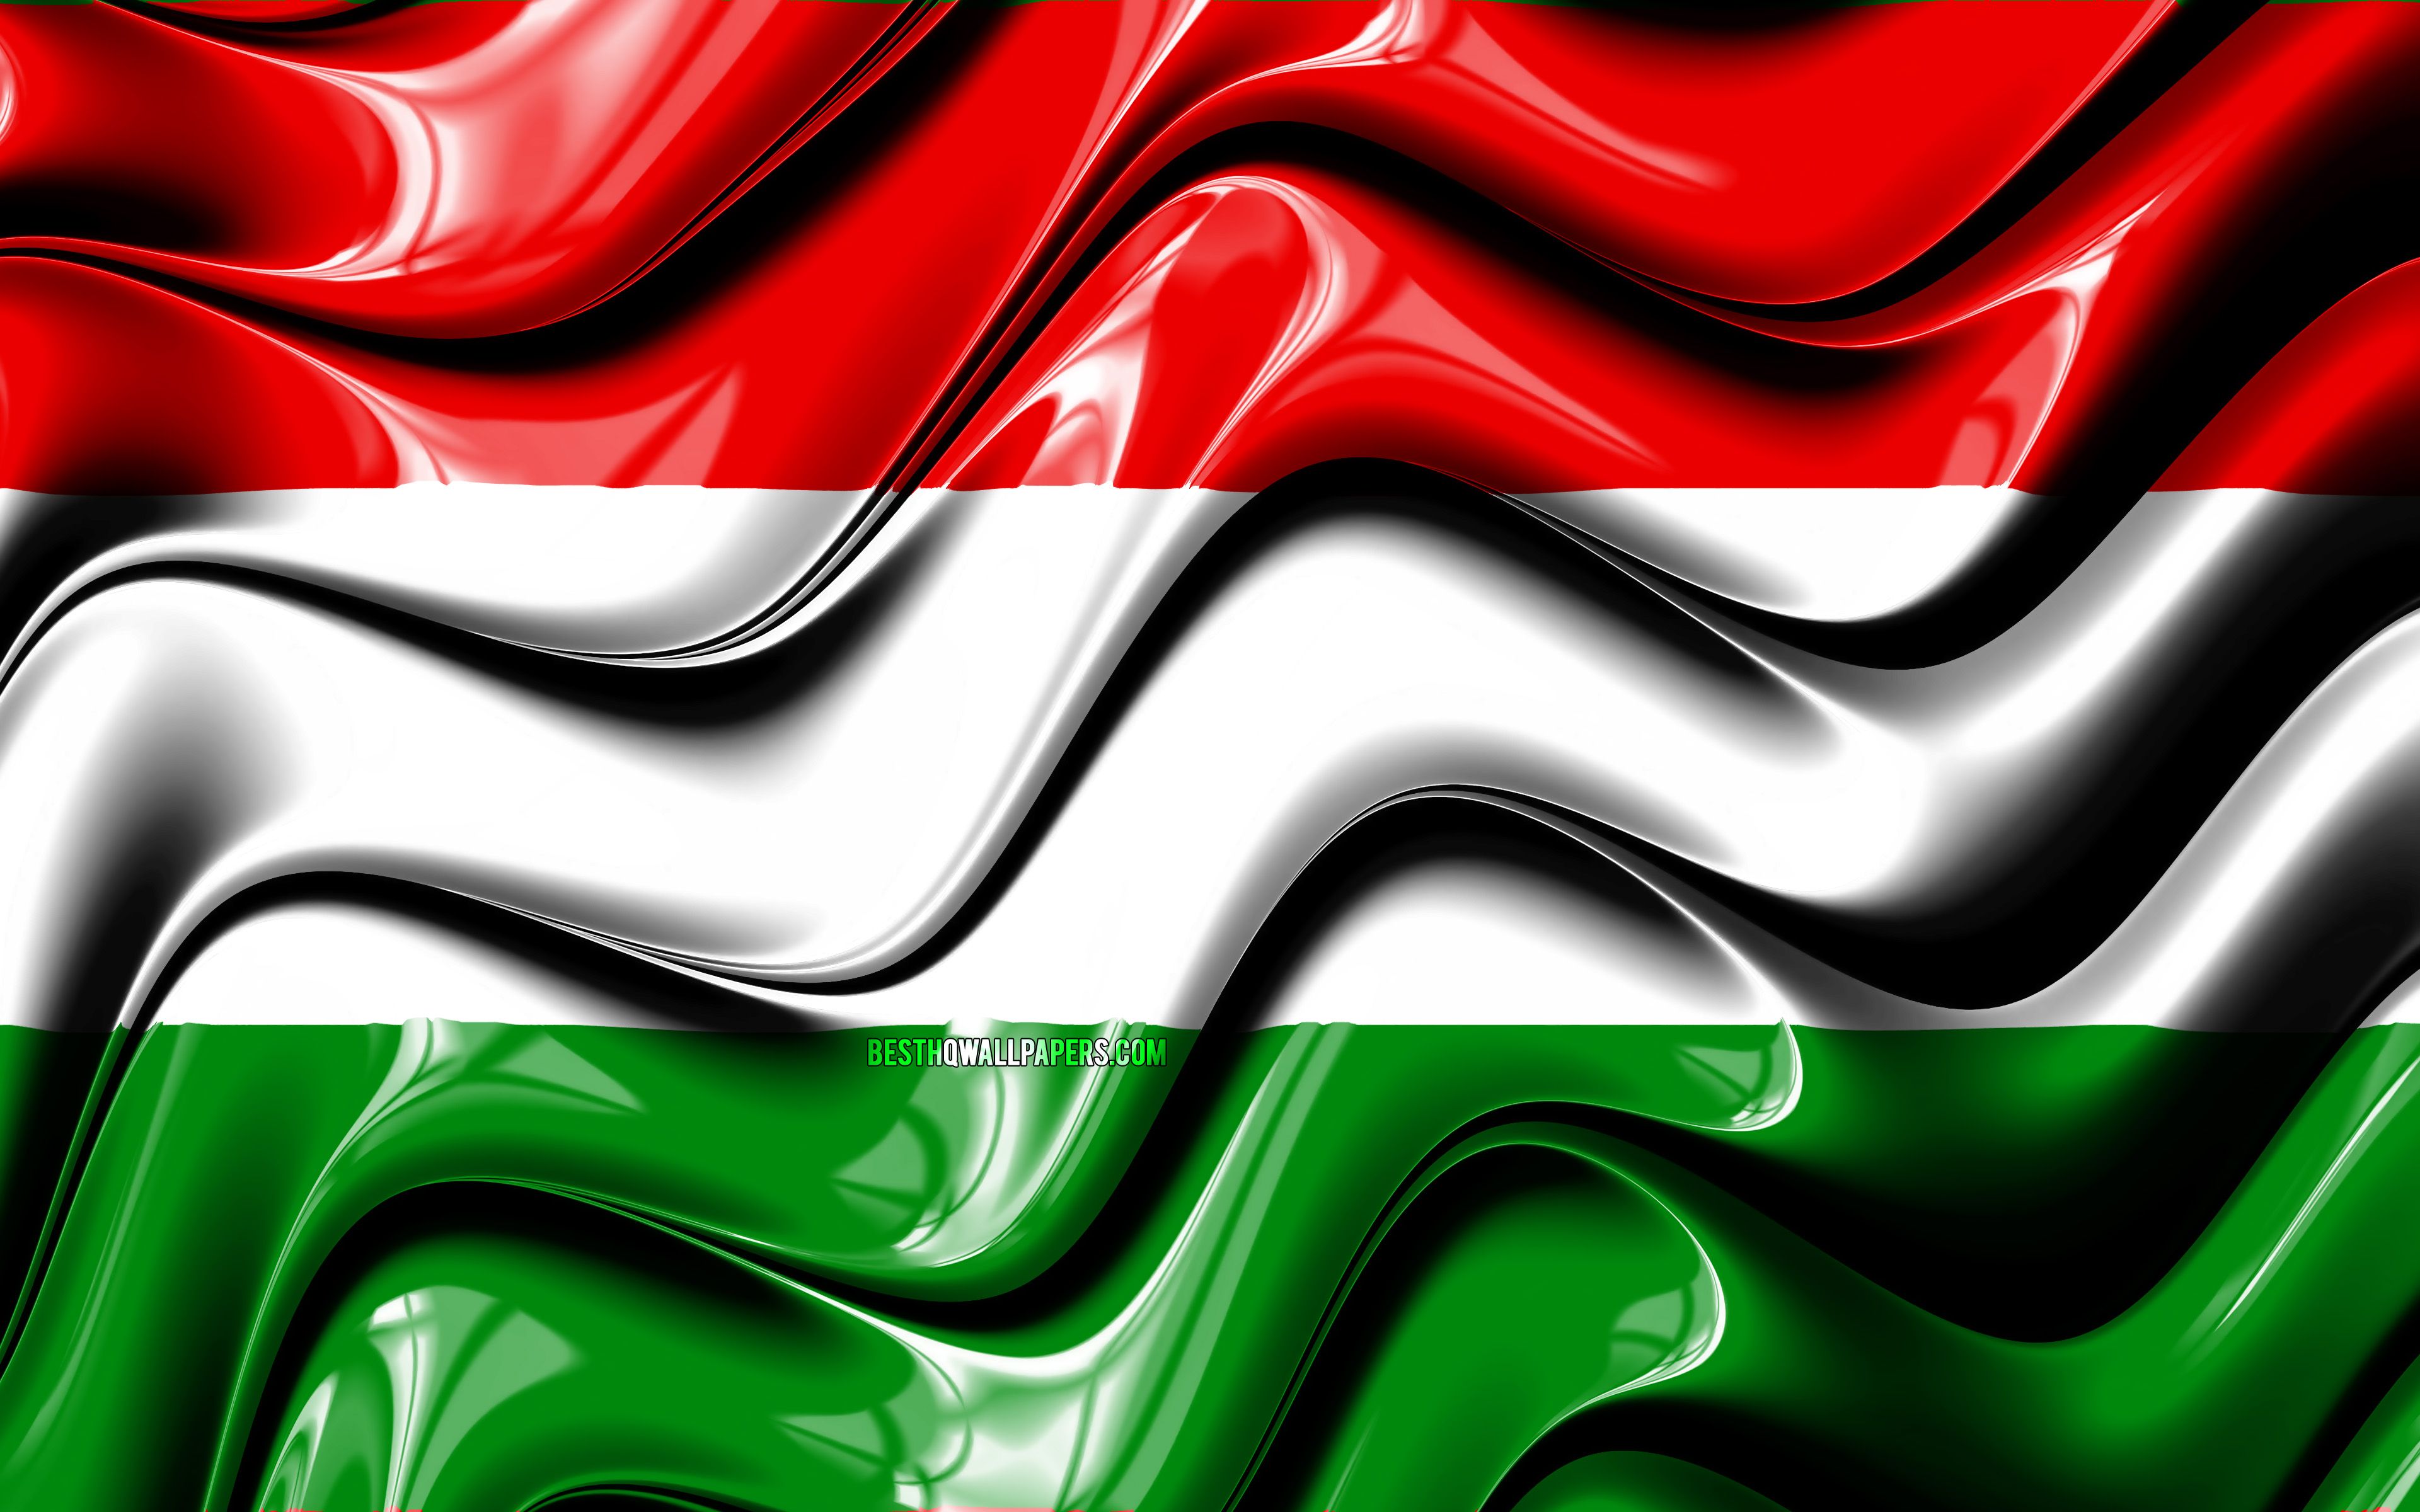 Download wallpaper Hungarian flag, 4k, Europe, national symbols, Flag of Hungary, 3D art, Hungary, European countries, Hungary 3D flag for desktop with resolution 3840x2400. High Quality HD picture wallpaper